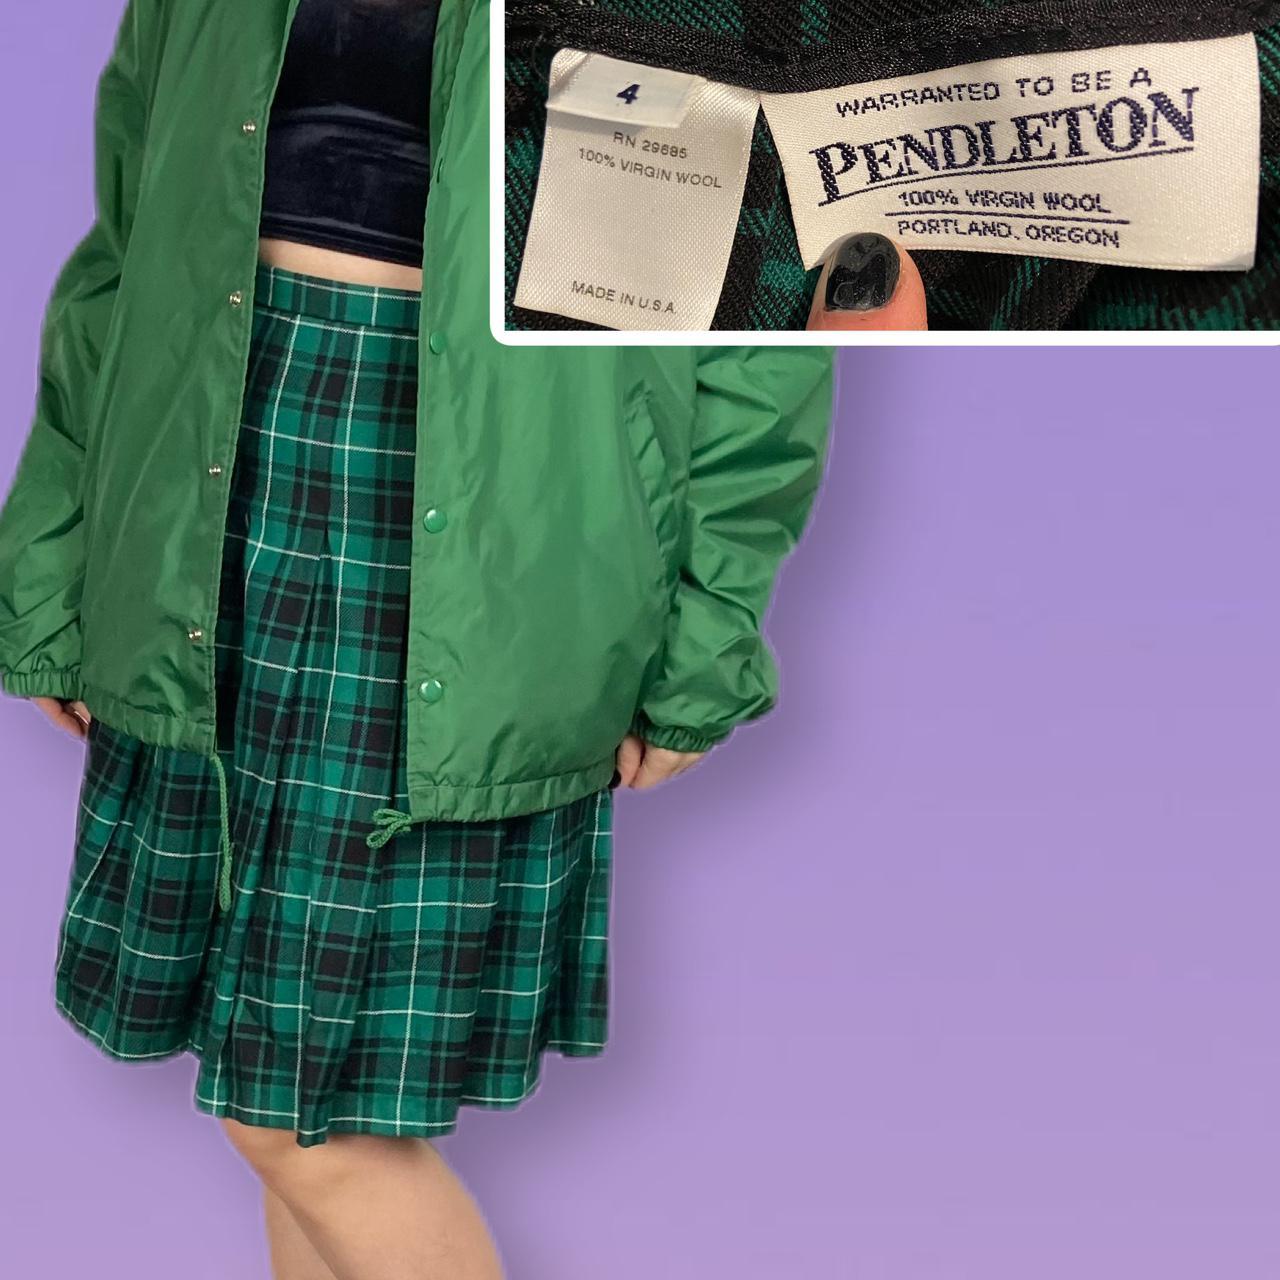 Product Image 3 - Green plaid skirt by Pendleton!